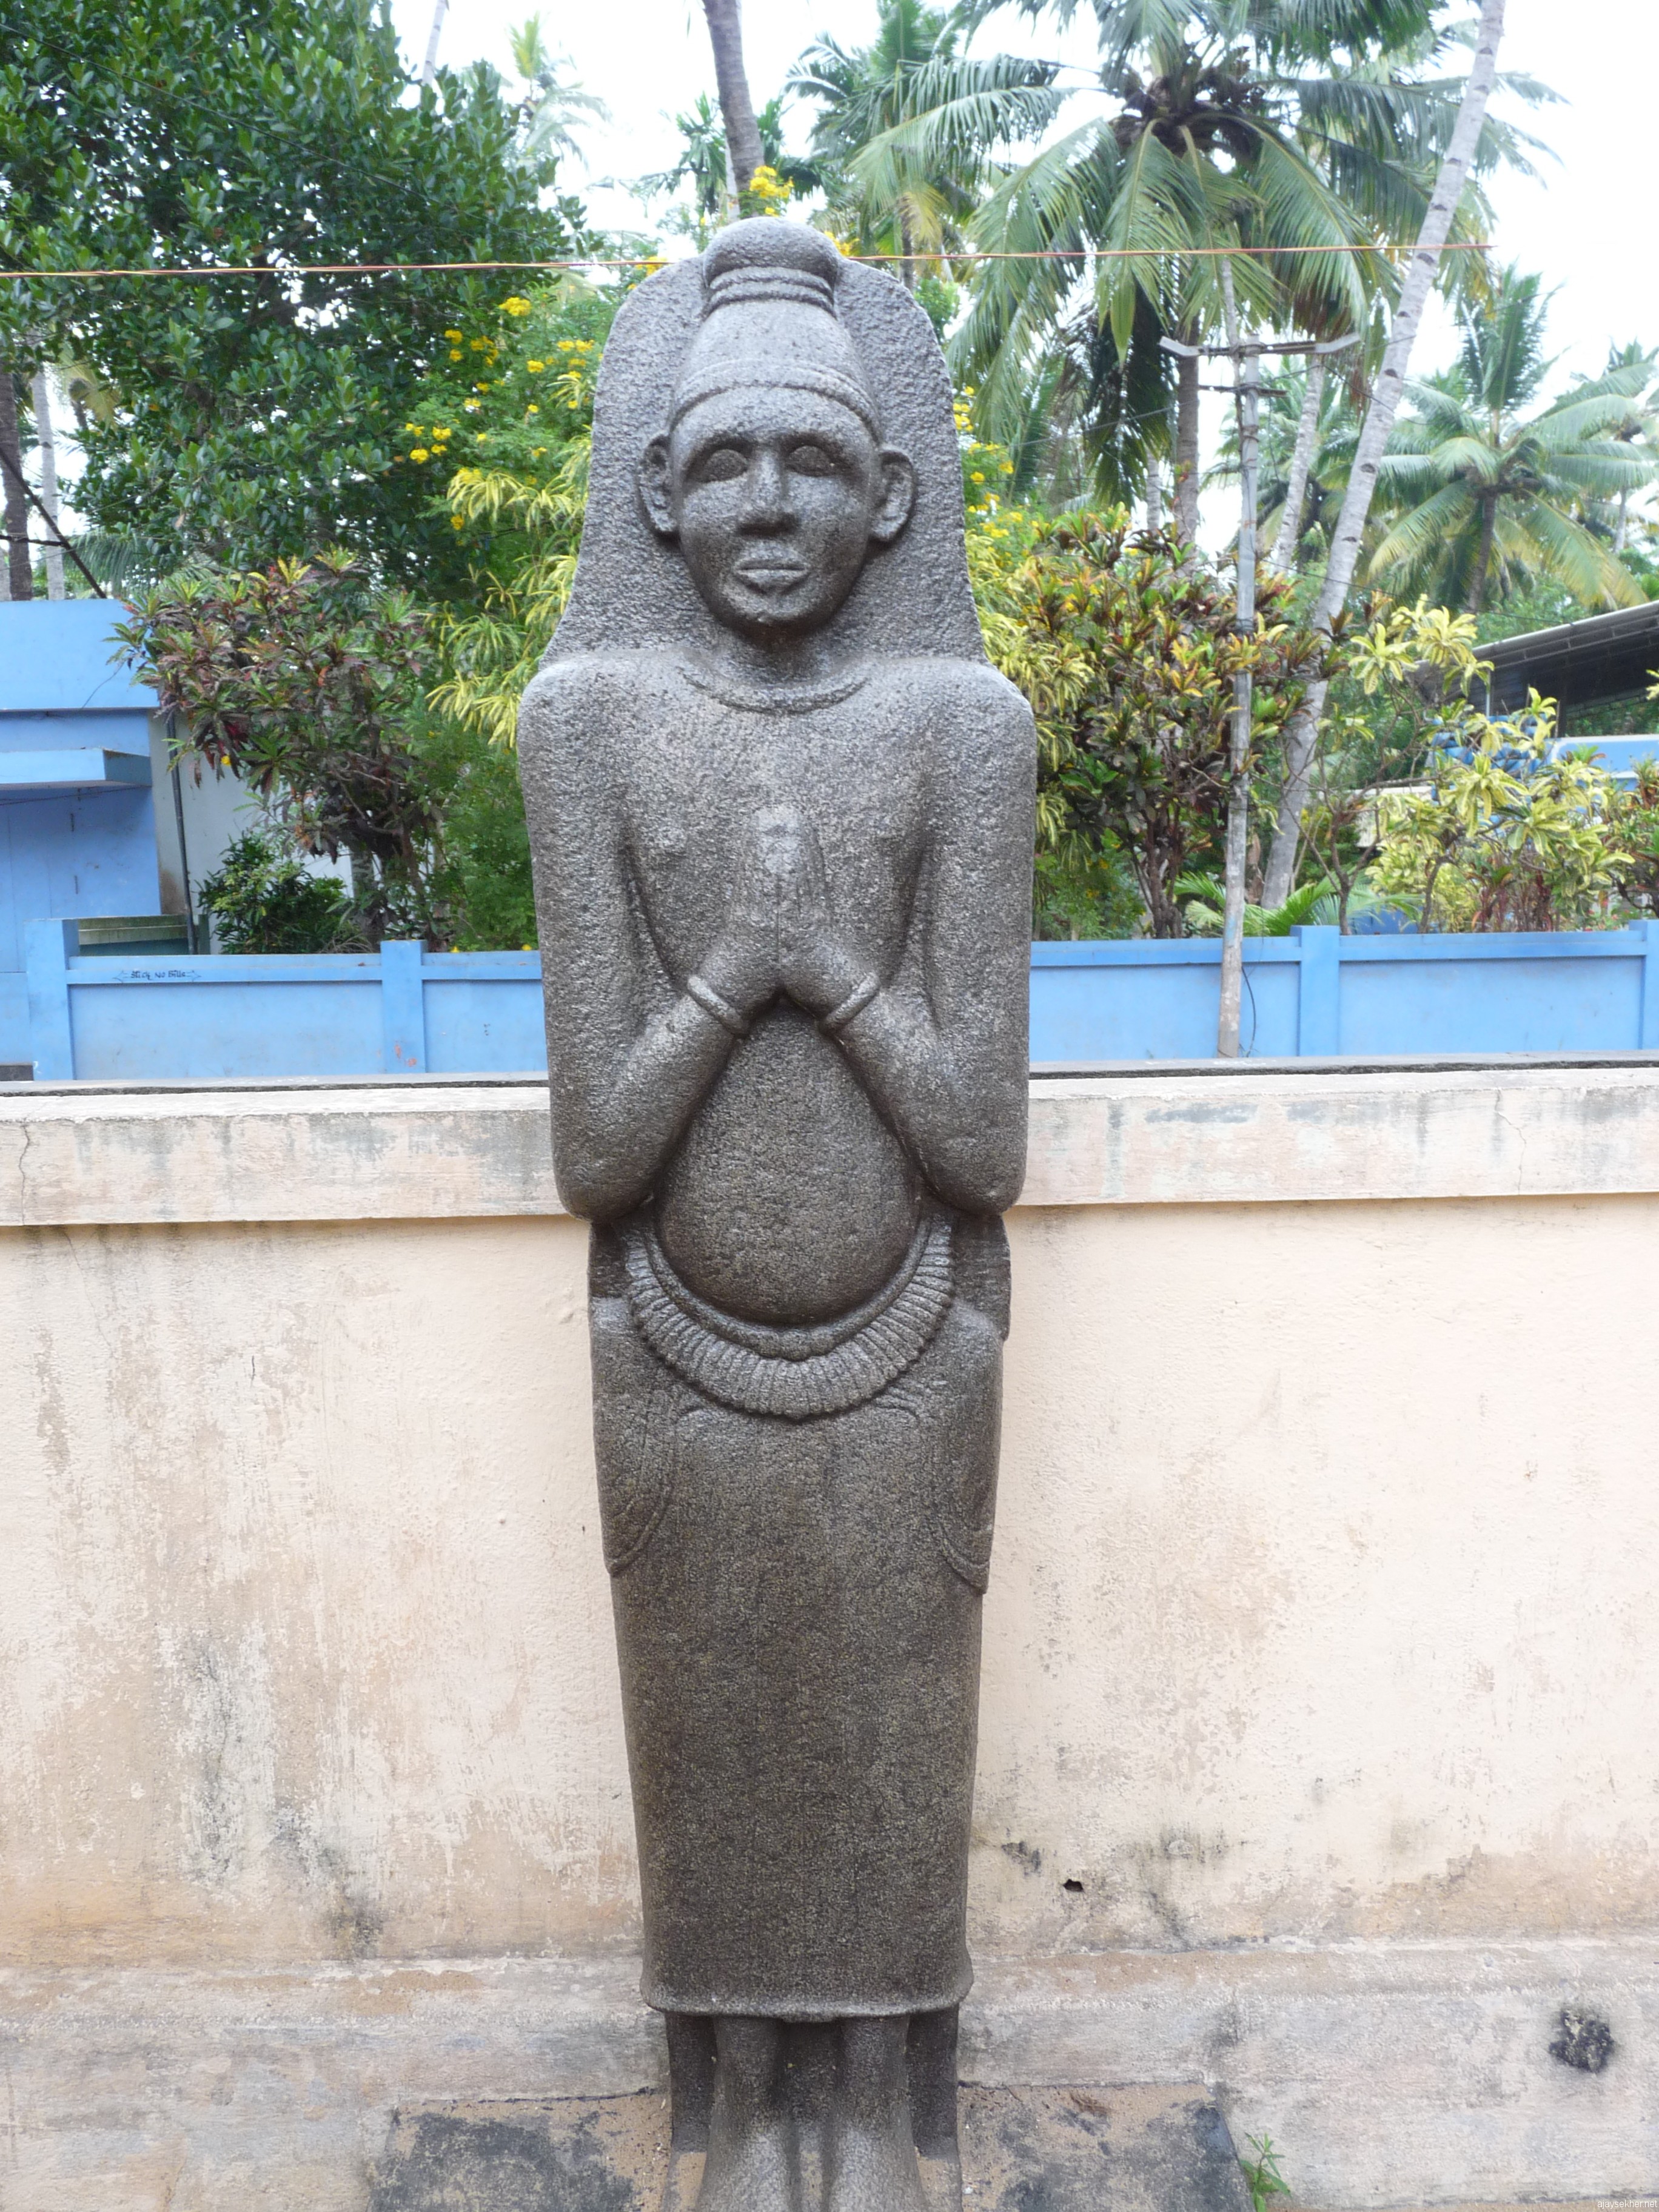 Siddha idol at Kayikara in Pranama posture also called Tozhuvan.  This traditional deity is locally called Chithan a vernacular version of the Siddha.  See the resemblance in the posture, broad shoulders and the loincloth.  